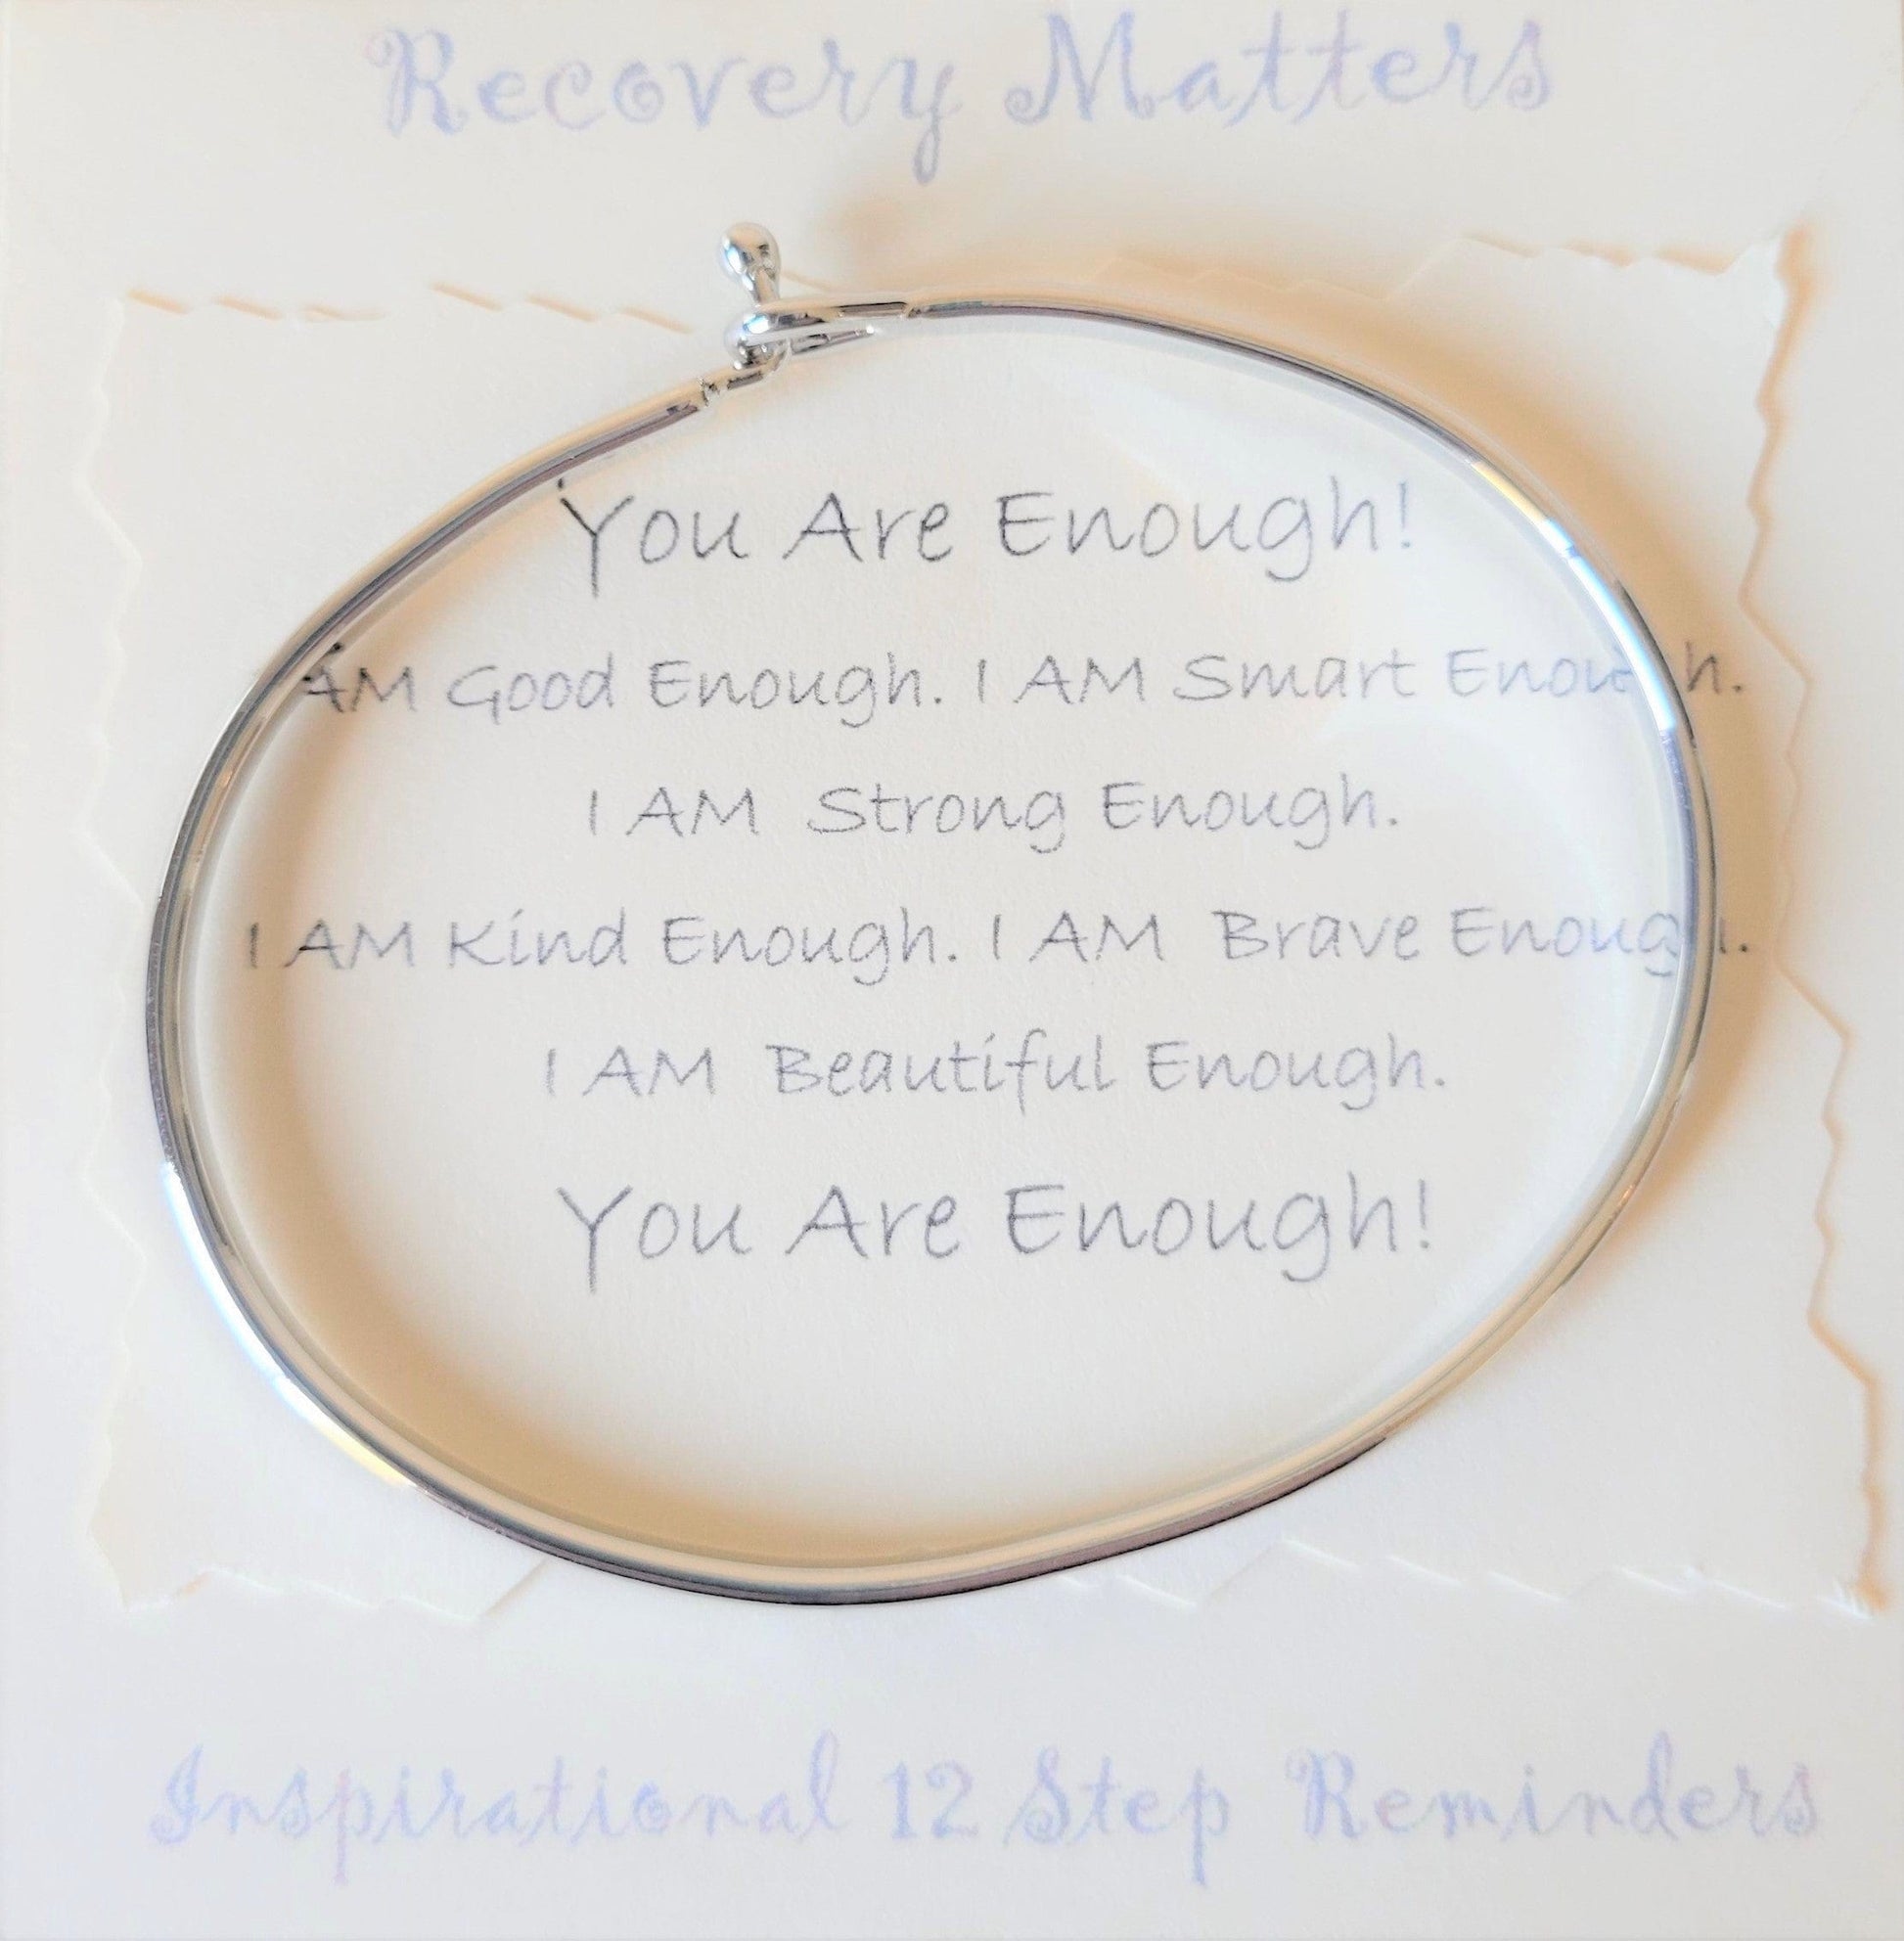 "You Are Enough!" Bracelet By Recovery Matters Rhodium Silver